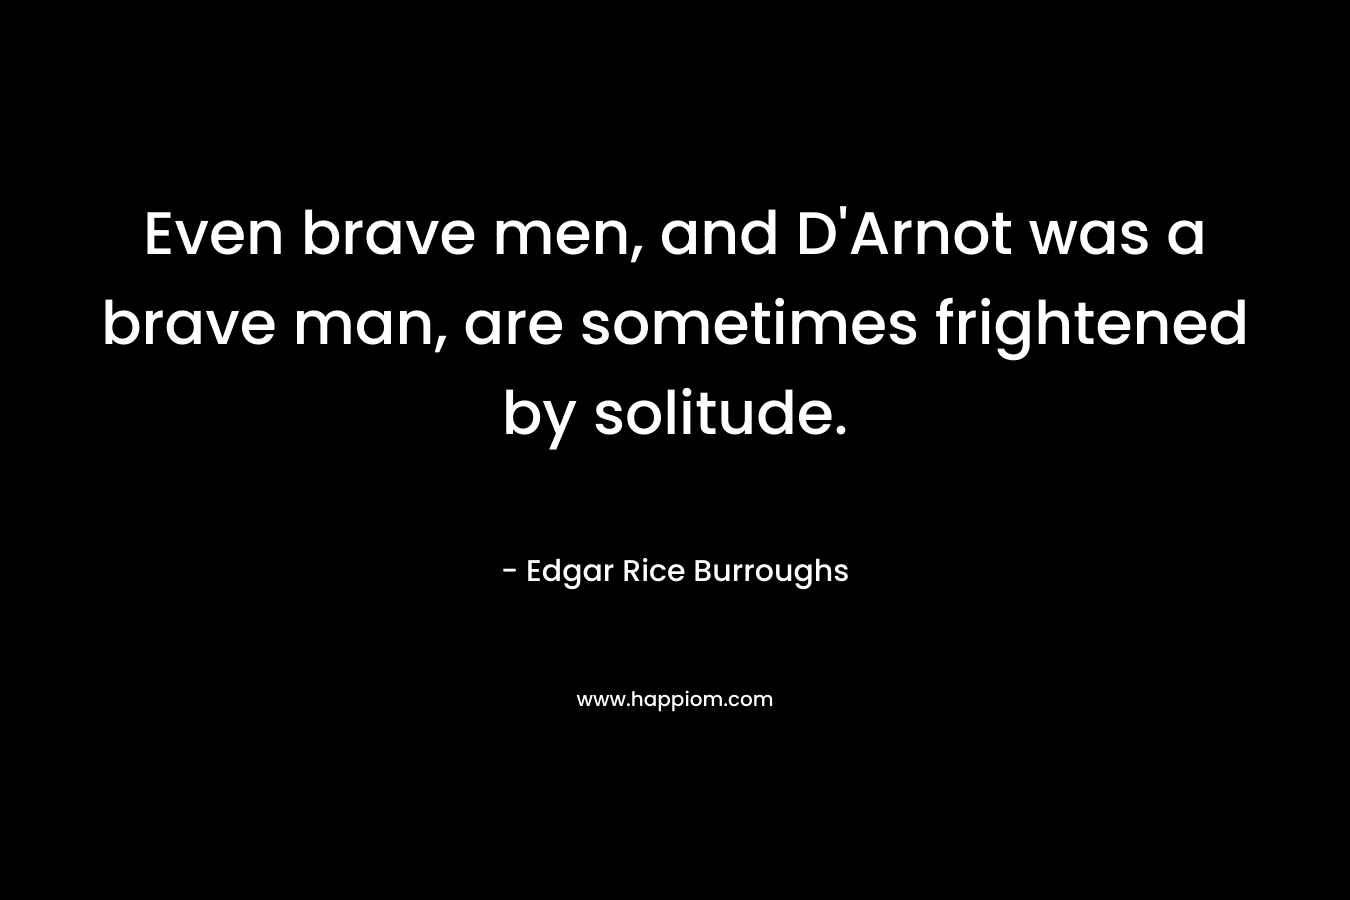 Even brave men, and D’Arnot was a brave man, are sometimes frightened by solitude. – Edgar Rice Burroughs